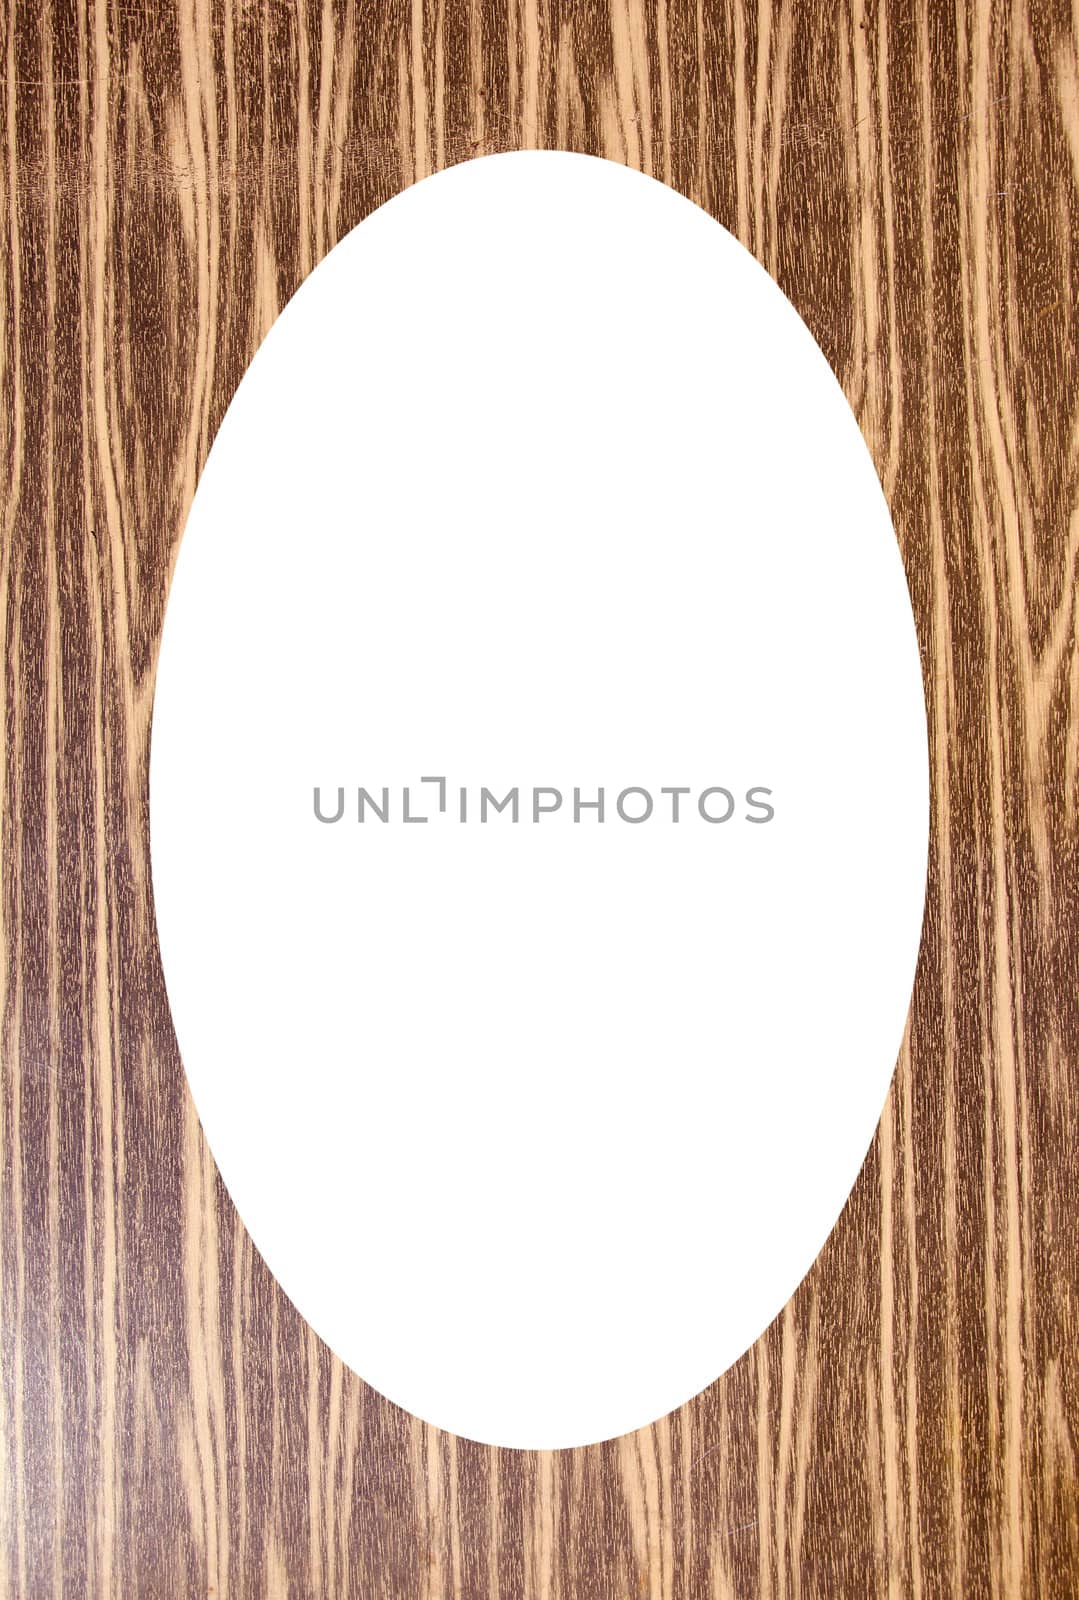 Cardboard background and white oval in center by sauletas